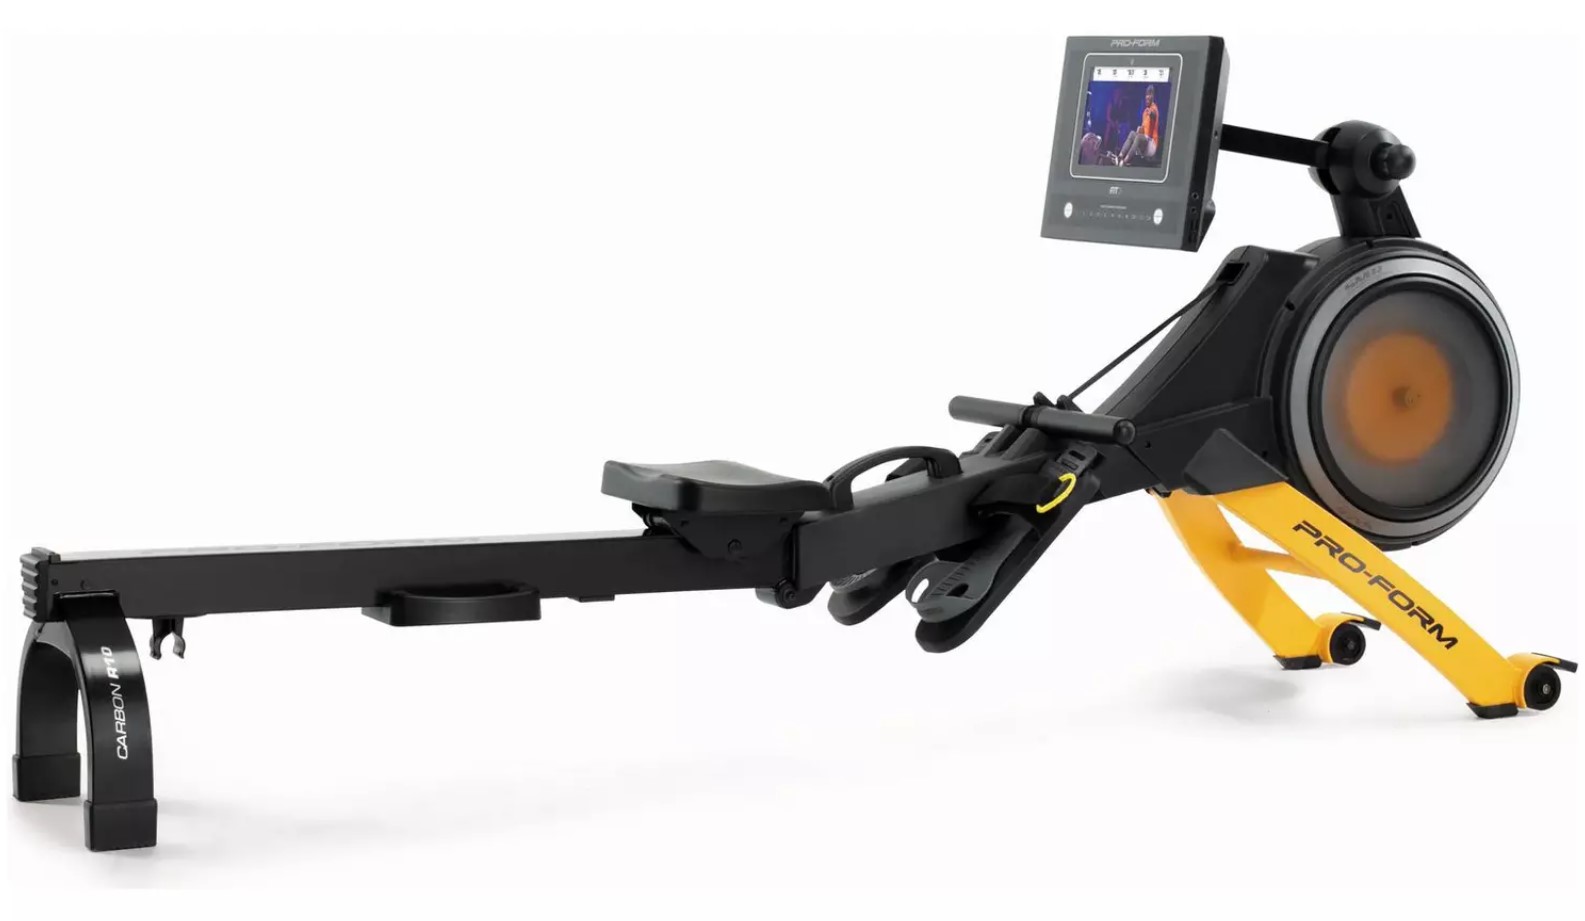 Product shot of ProForm Carbon rowing machine